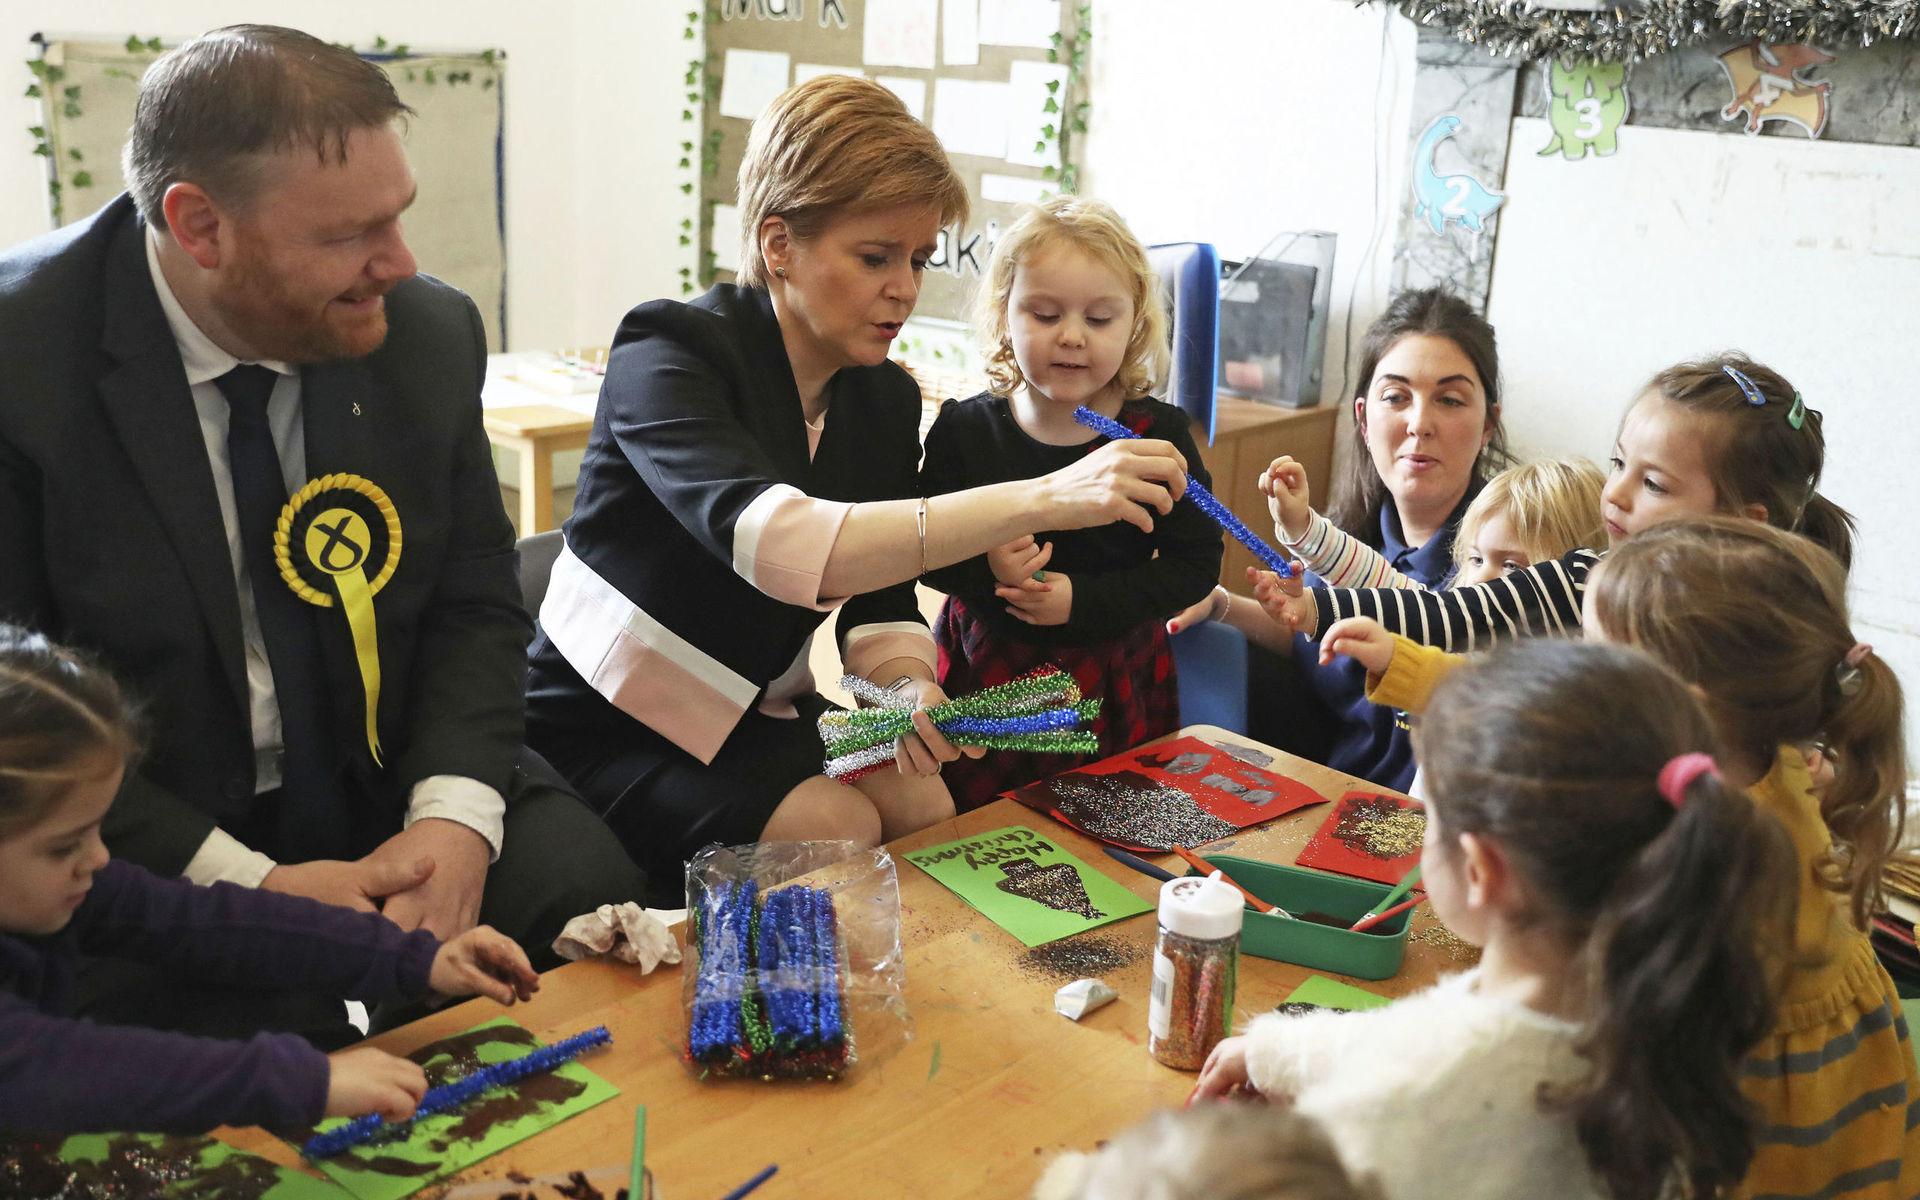 Scottish National Party leader Nicola Sturgeon joins SNP election candidate Owen Thompson, left, during a visit to a nursery in Dalkeith, Scotland, while on the General Election campaign trail, Wednesday Dec. 4, 2019.  Britain&apos;s Brexit is one of the main issues for political parties and for voters, as the UK goes to the polls in a General Election on Dec. 12. (Andrew Milligan/PA via AP)  LRC815